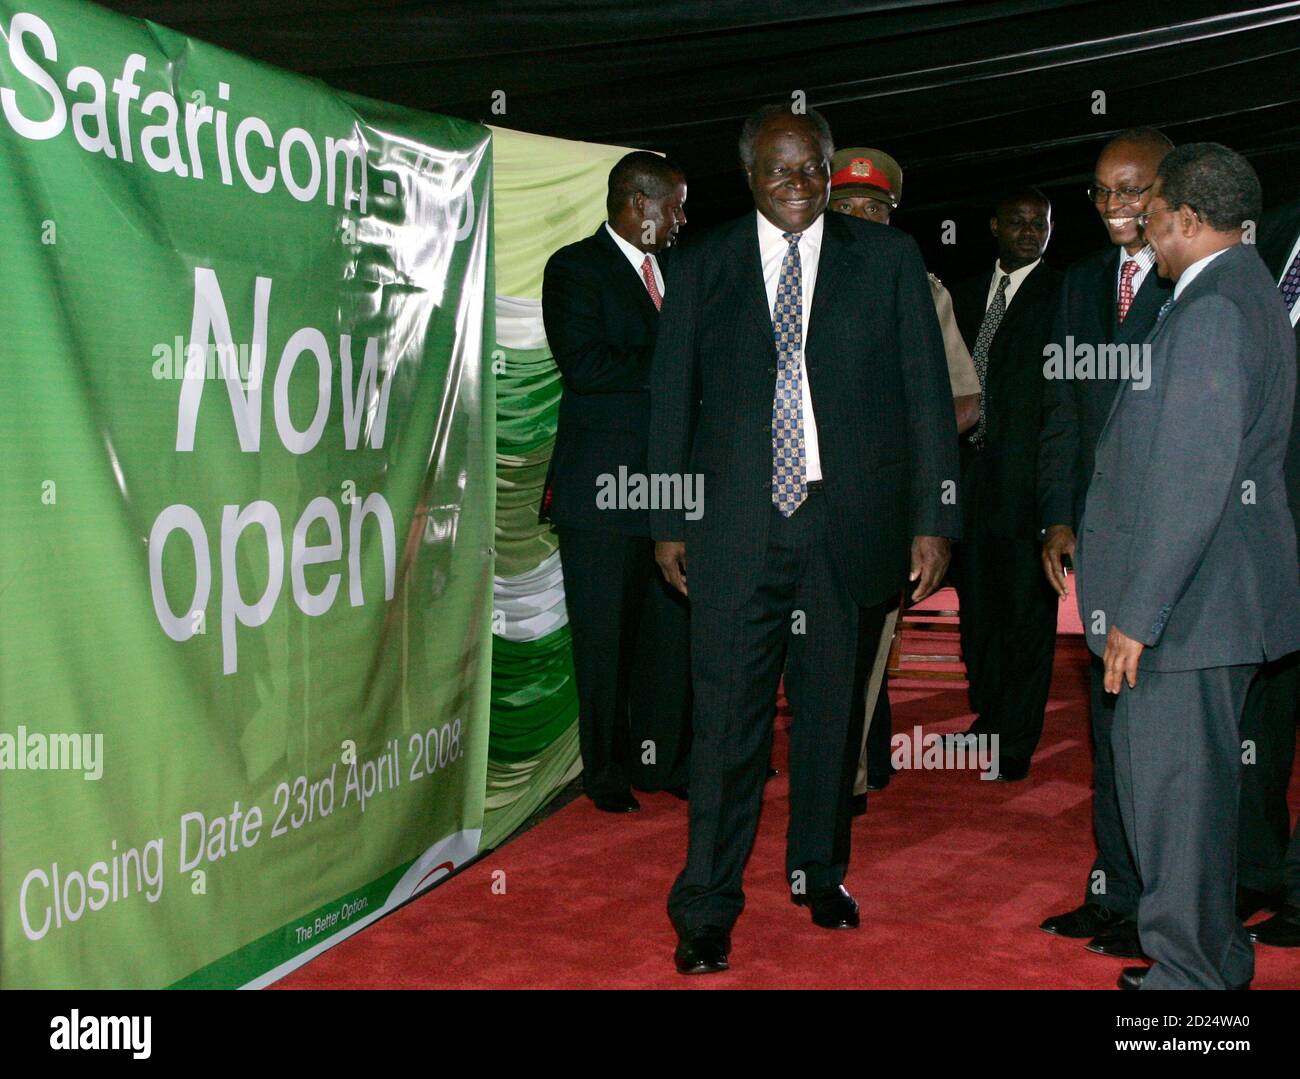 Kenya's President Mwai Kibaki (C) chats with delegates after launching the Safaricom Initial Public Offer (IPO) in Nairobi March 28, 2008. Thousands of Kenyans queued to buy shares in mobile phone firm Safaricom on Friday, shrugging off calls for east Africa's biggest IPO to be delayed until a riddle over a mysterious third shareholder was resolved. In a sign of returning stability in Kenya after a bloody post-election crisis, the government is offloading a 25 percent stake worth at least 50 billion shillings ($779.4 million) in Safaricom. It had held 60 percent in Safaricom. REUTERS/Antony Nj Stock Photo